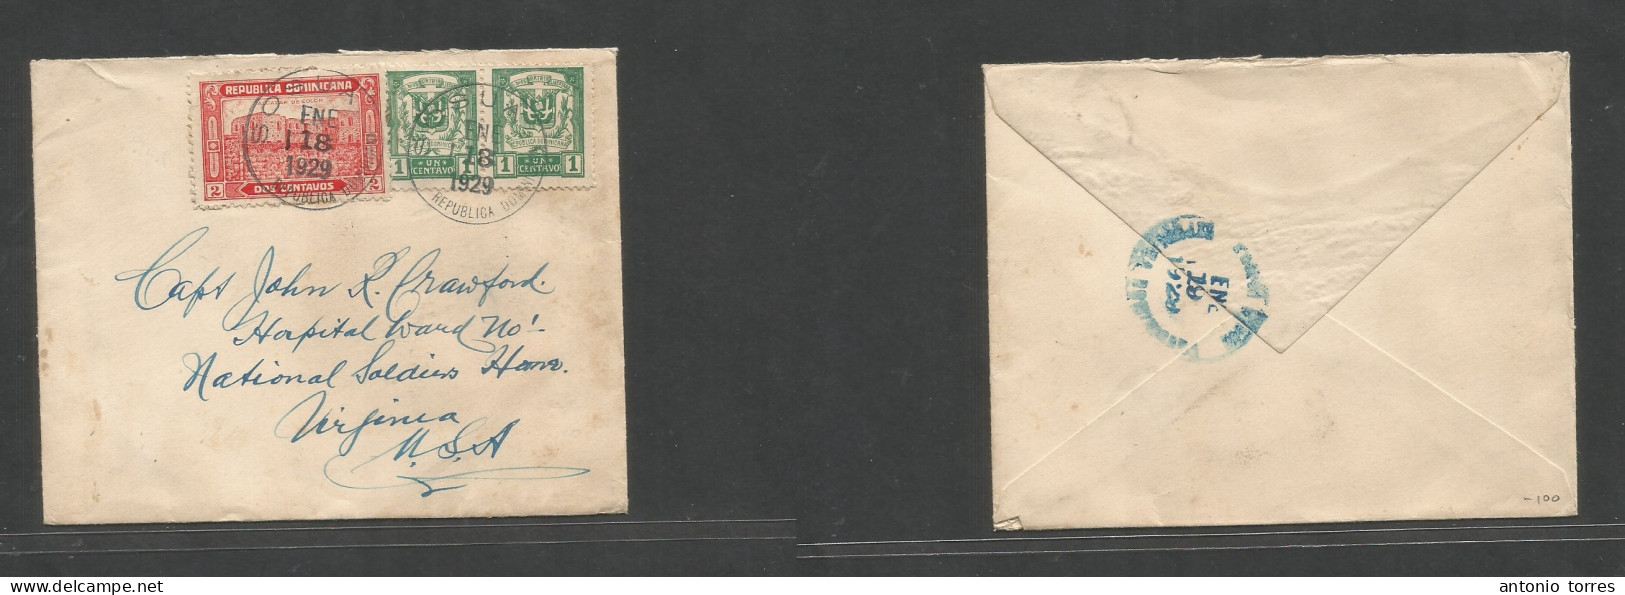 Dominican Rep. 1929 (18 Ene) Sosna - USA, Va, National Soldiers Home Hospital. Multifkd Env, At 4c Rate, Blue Cds. Fine - Dominikanische Rep.